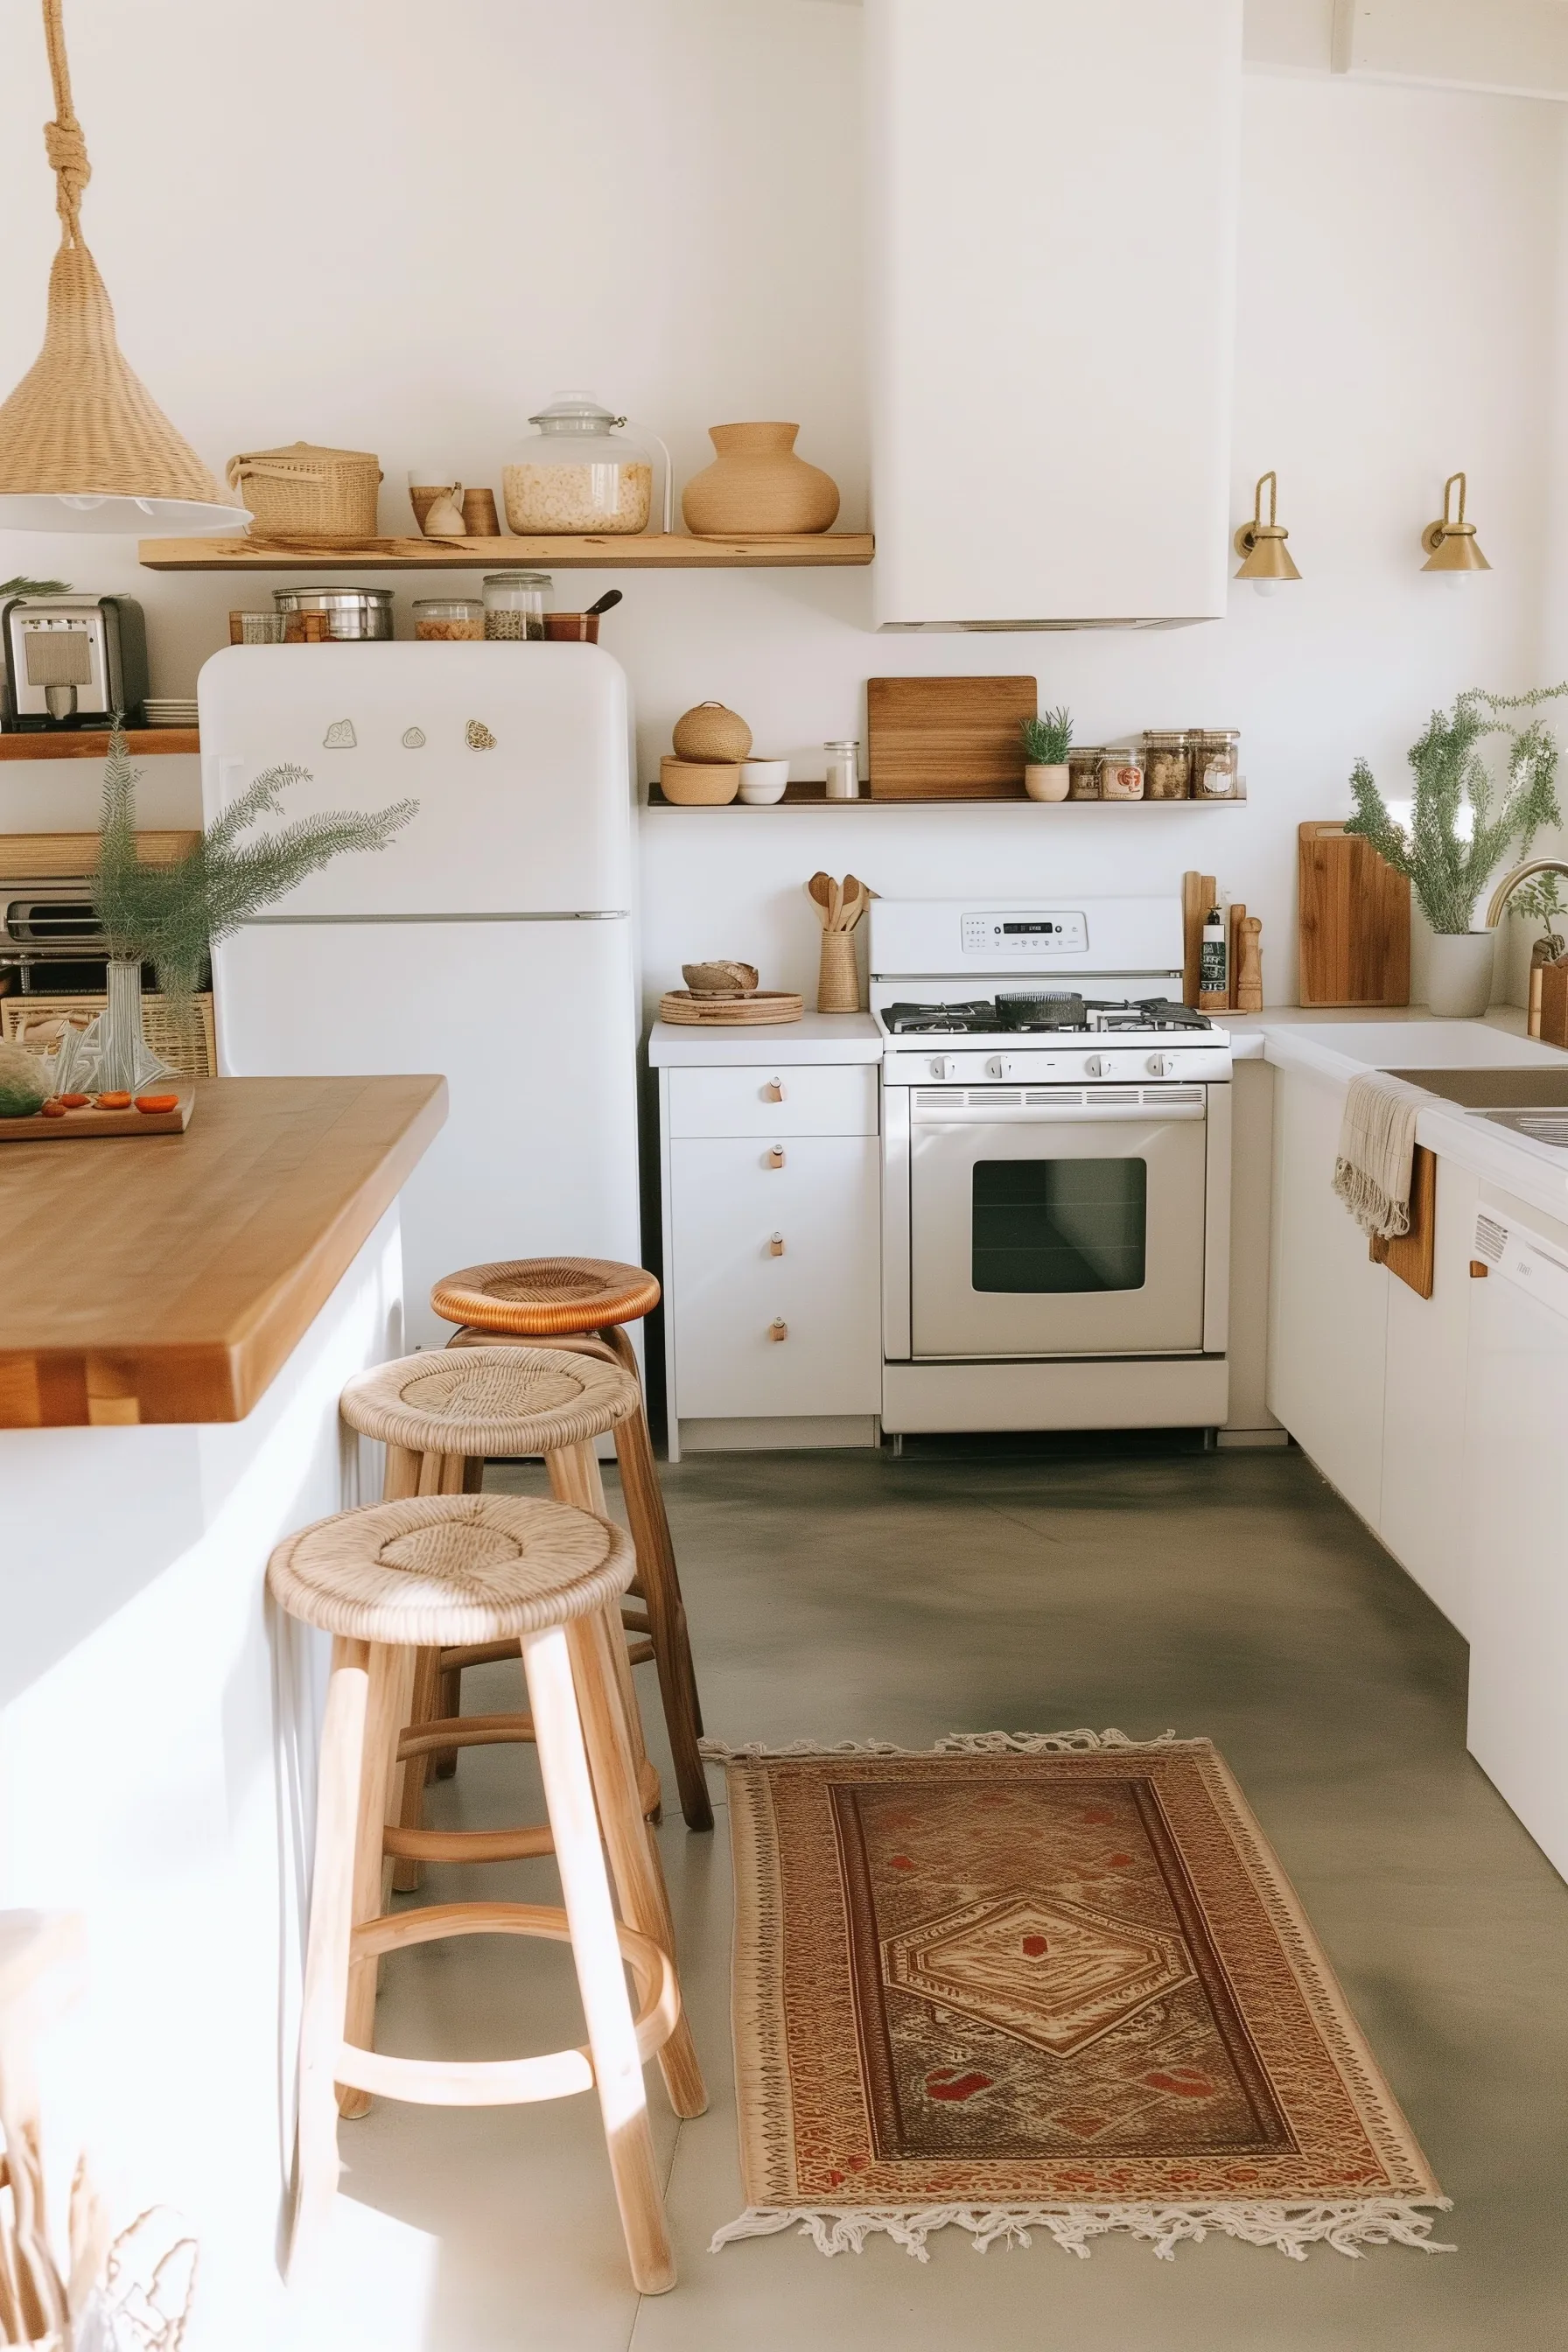 A terracotta and rust colored Boho kitchen